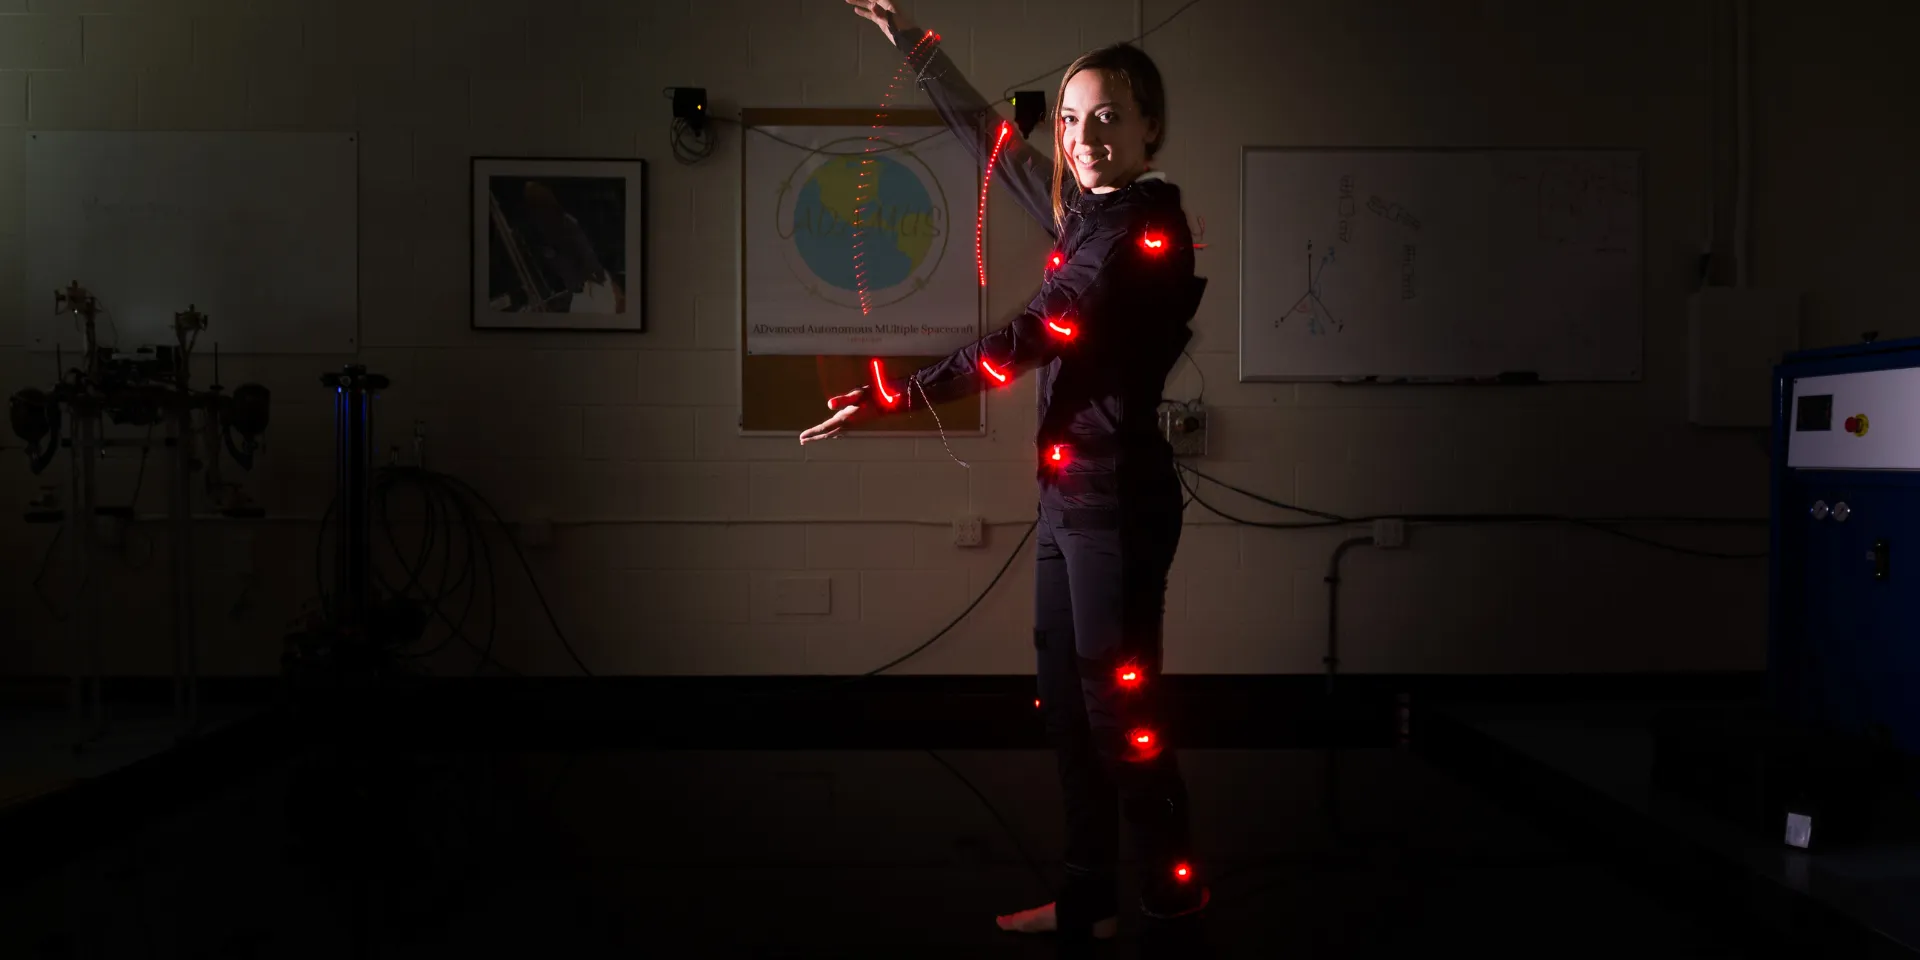 Engineering student does the Gator Chomp, creating light trails.